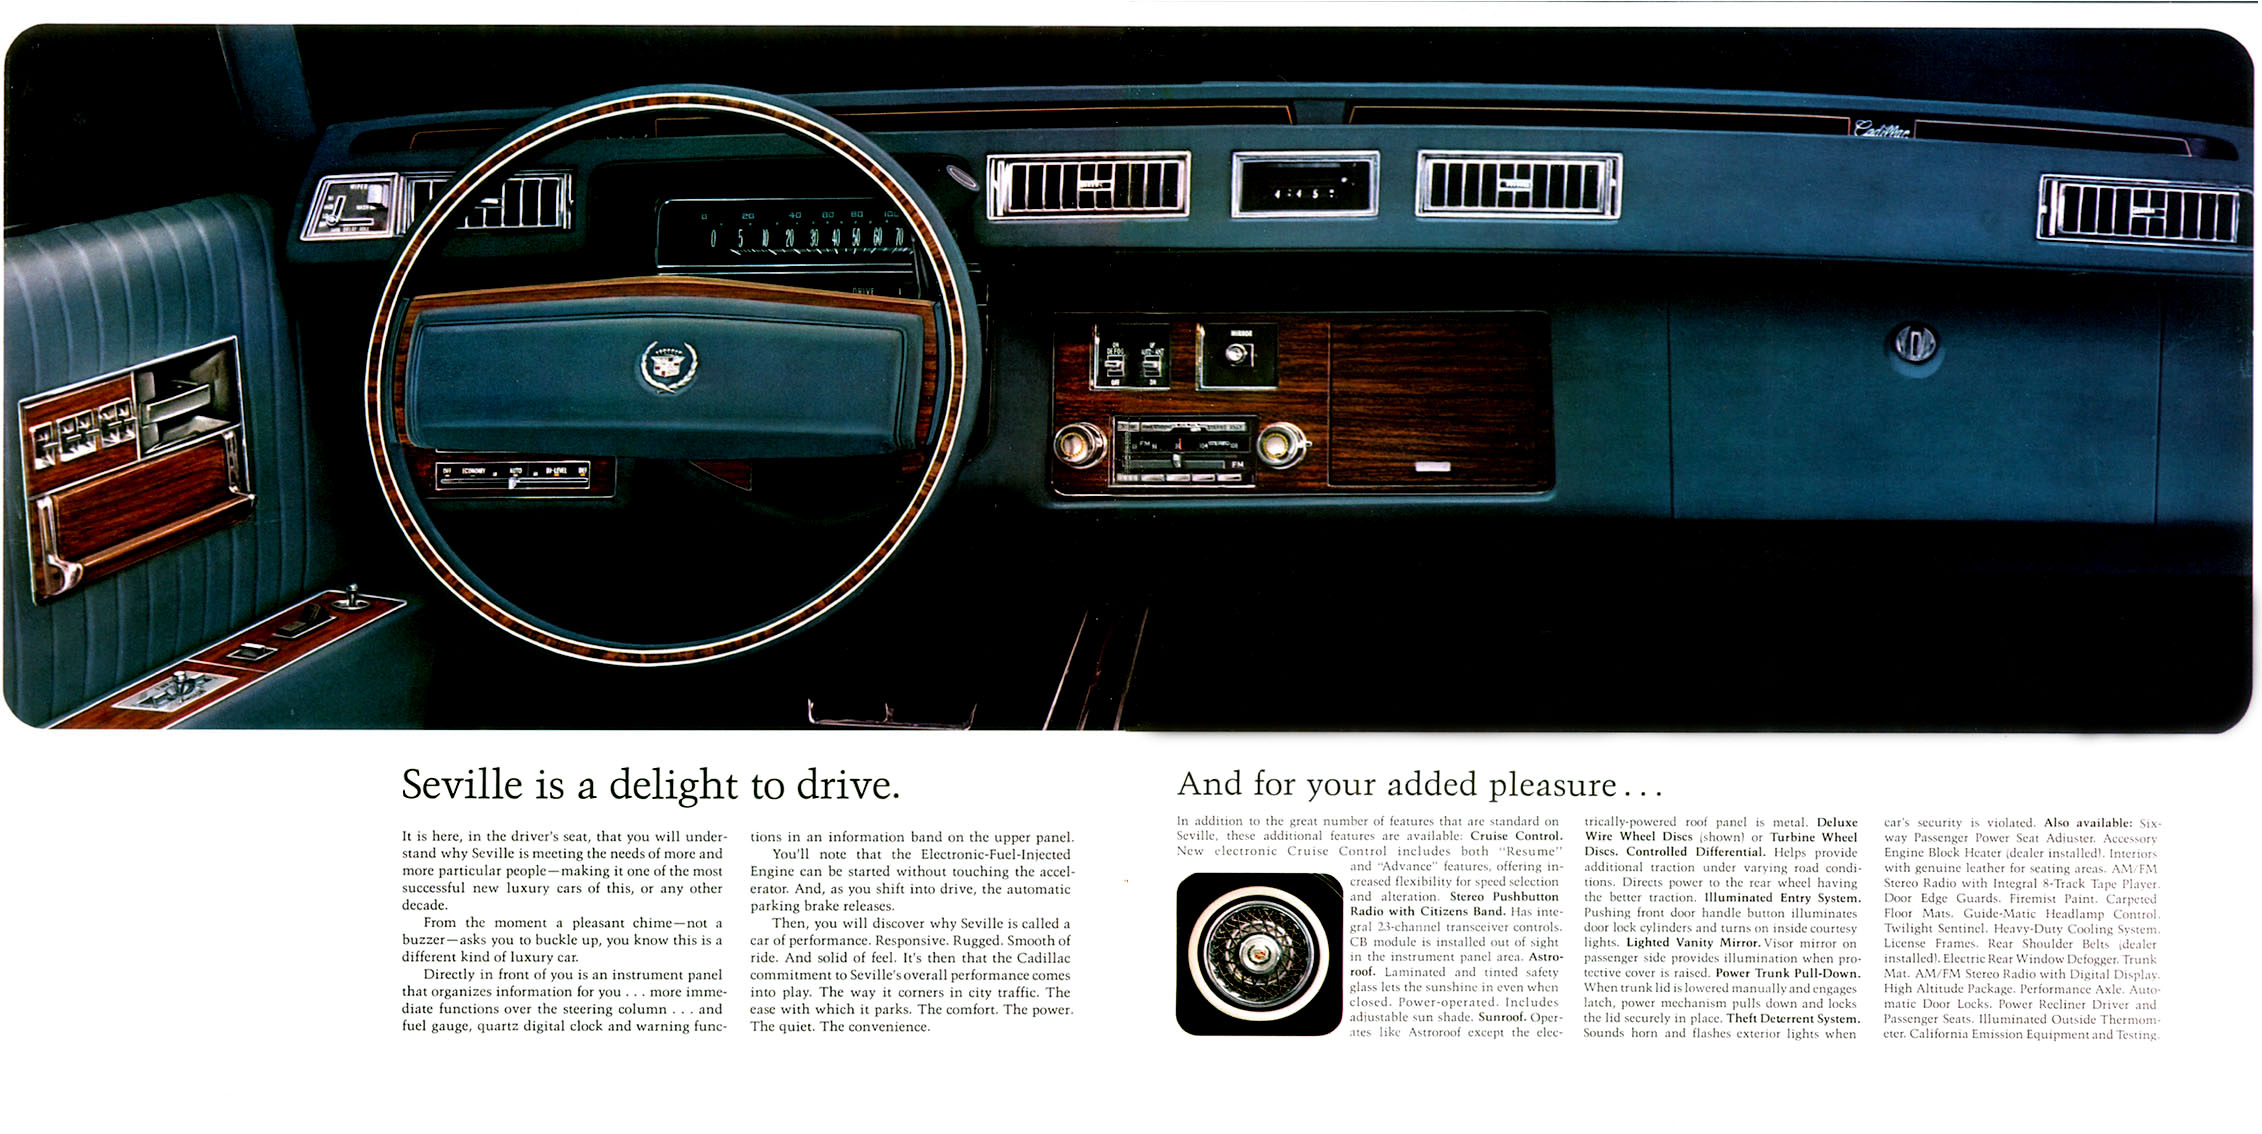 1977 Cadillac Seville Brochure Page 4